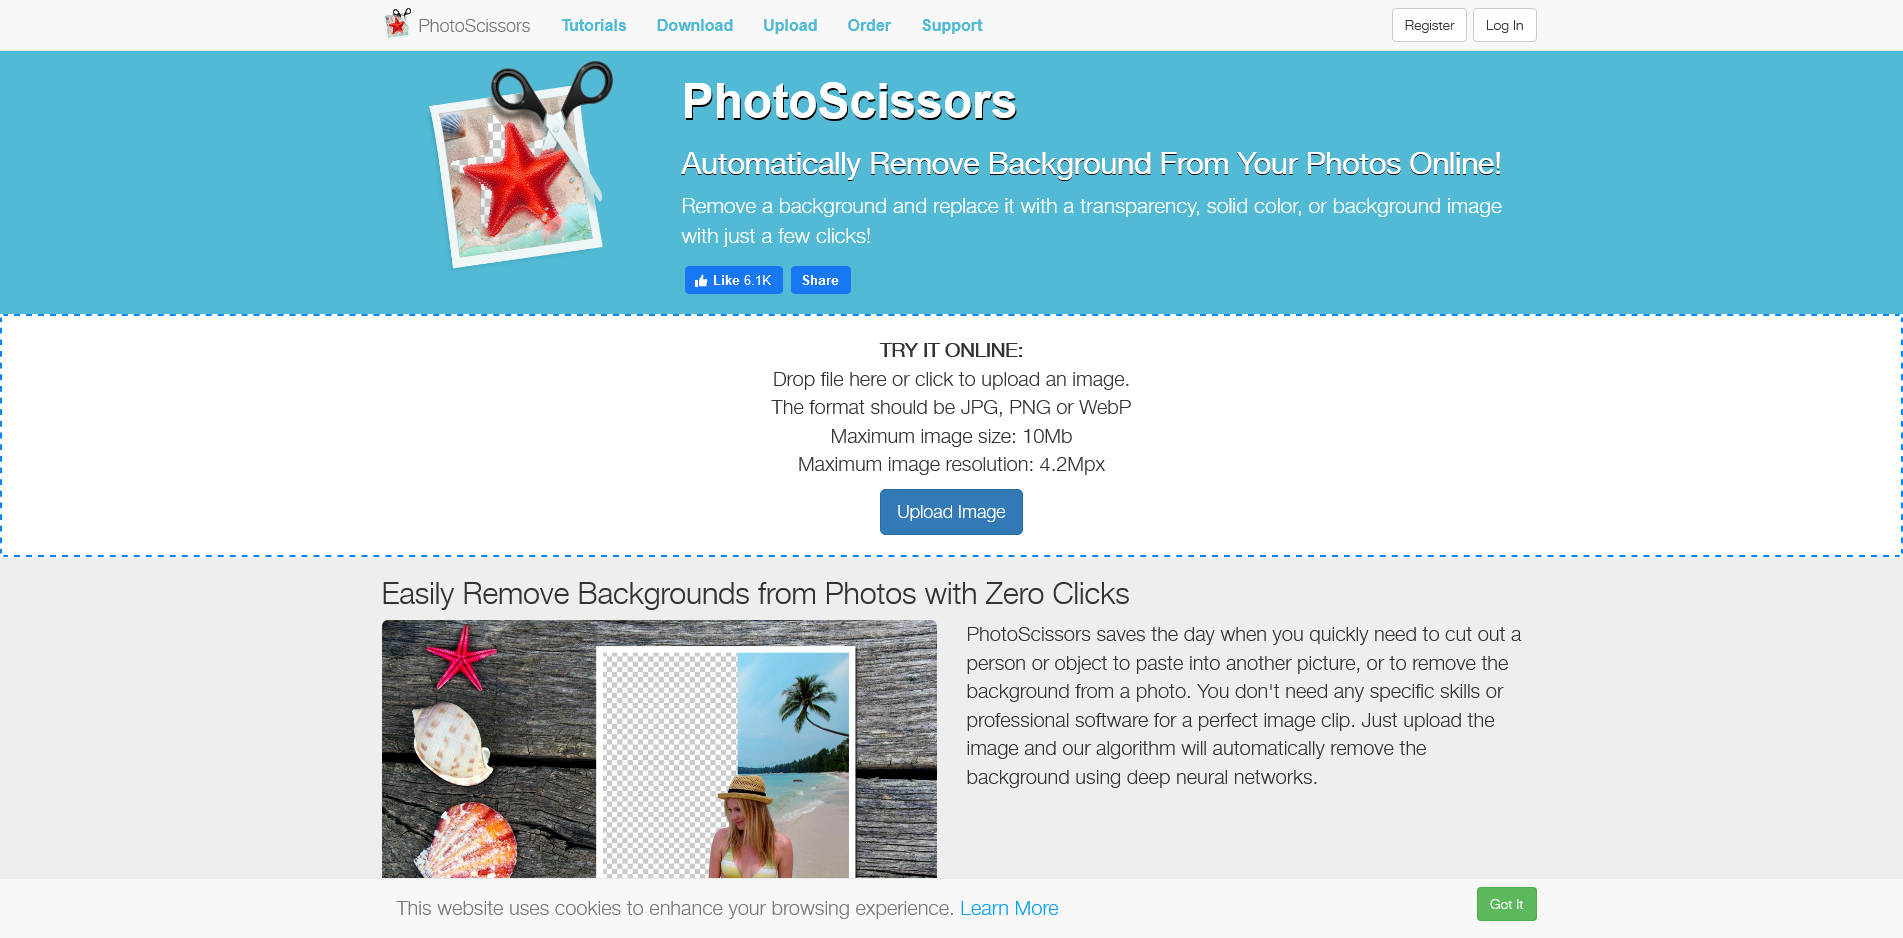 Remove Background Easily - Learn from Freebiehive Blog